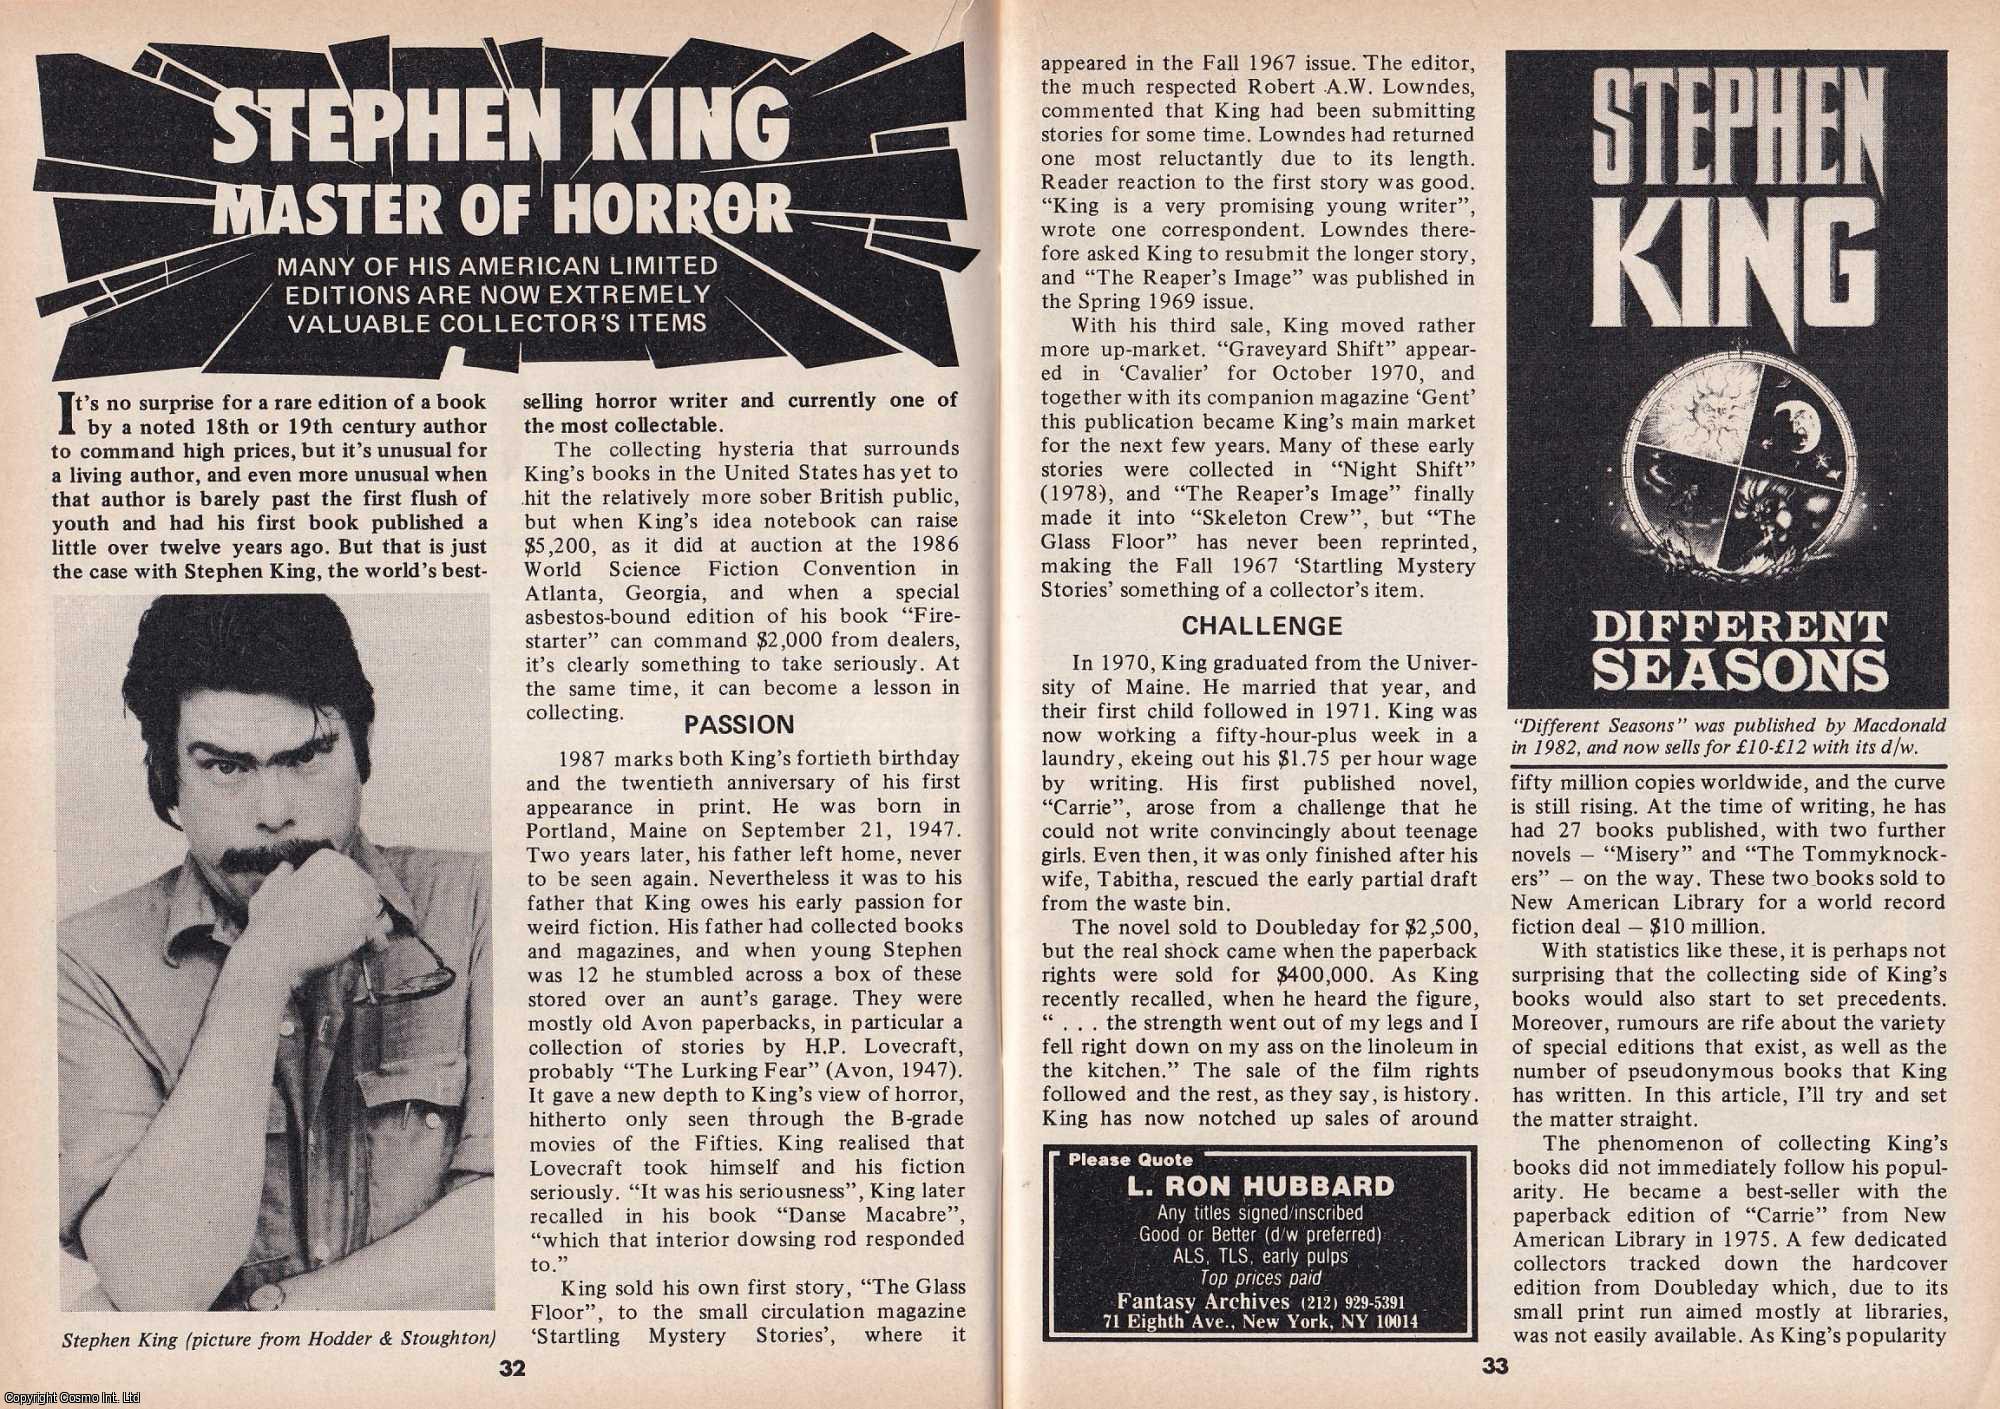 --- - Stephen King. Master of Horror. This is an original article separated from an issue of The Book & Magazine Collector publication.